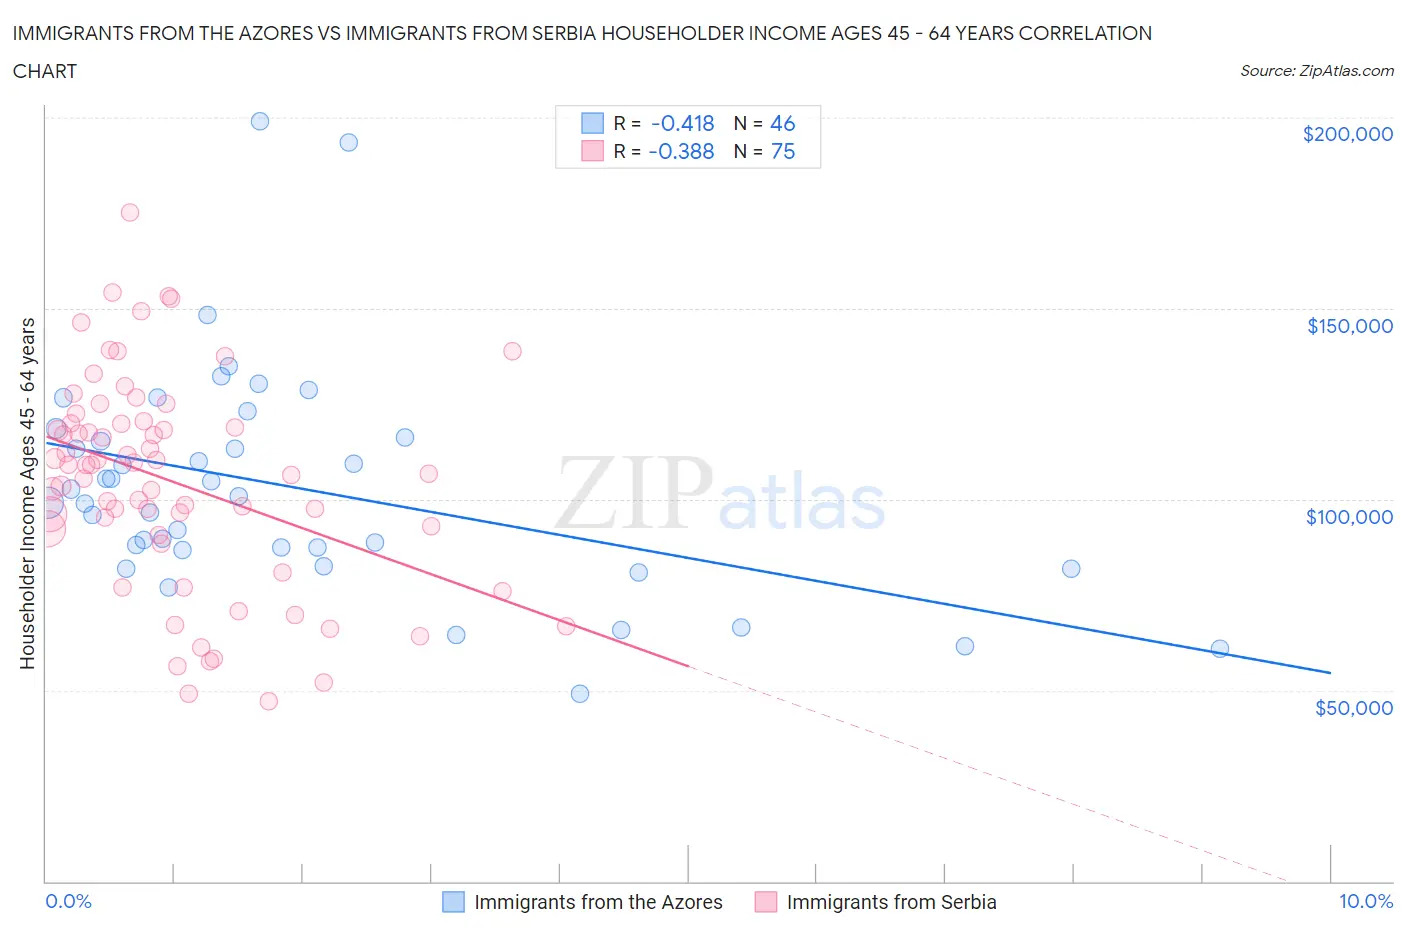 Immigrants from the Azores vs Immigrants from Serbia Householder Income Ages 45 - 64 years